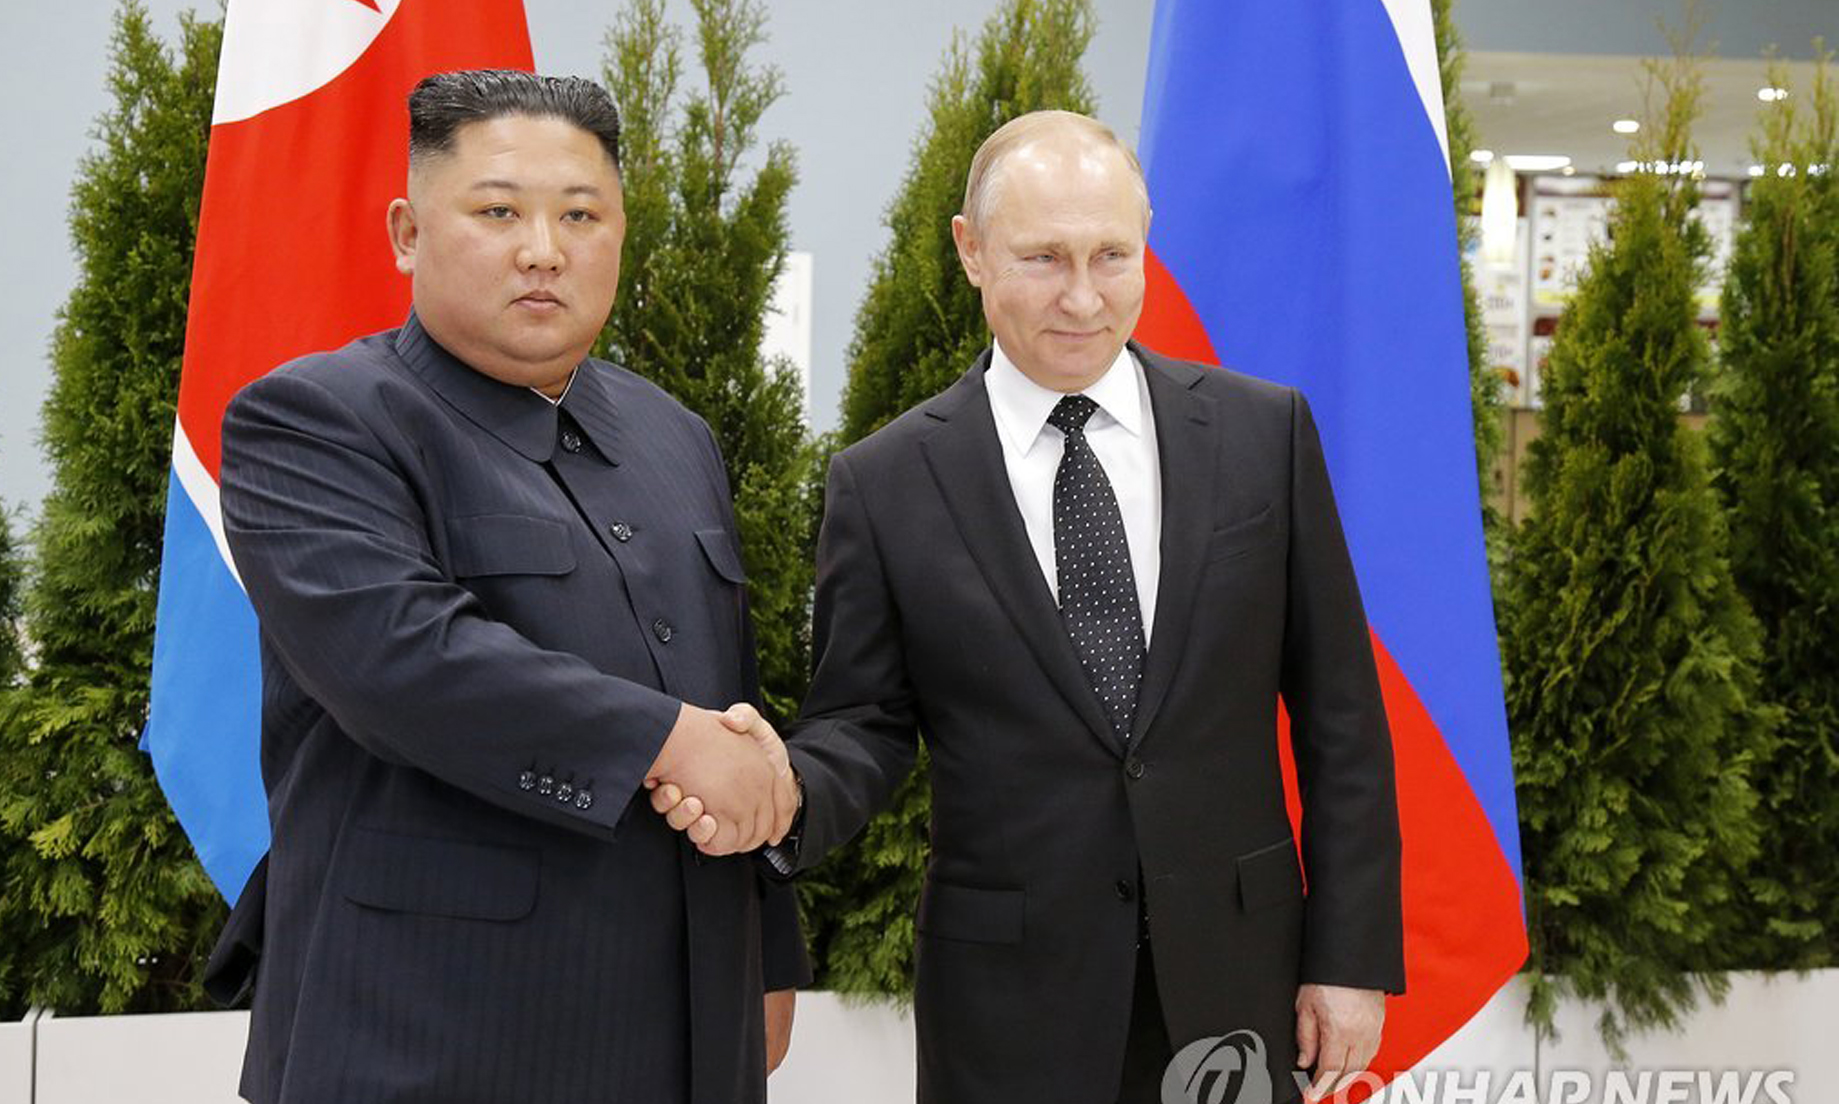 Kim resolves to deepen Russia ties, Putin calls for peaceful resolution of nuke standoff